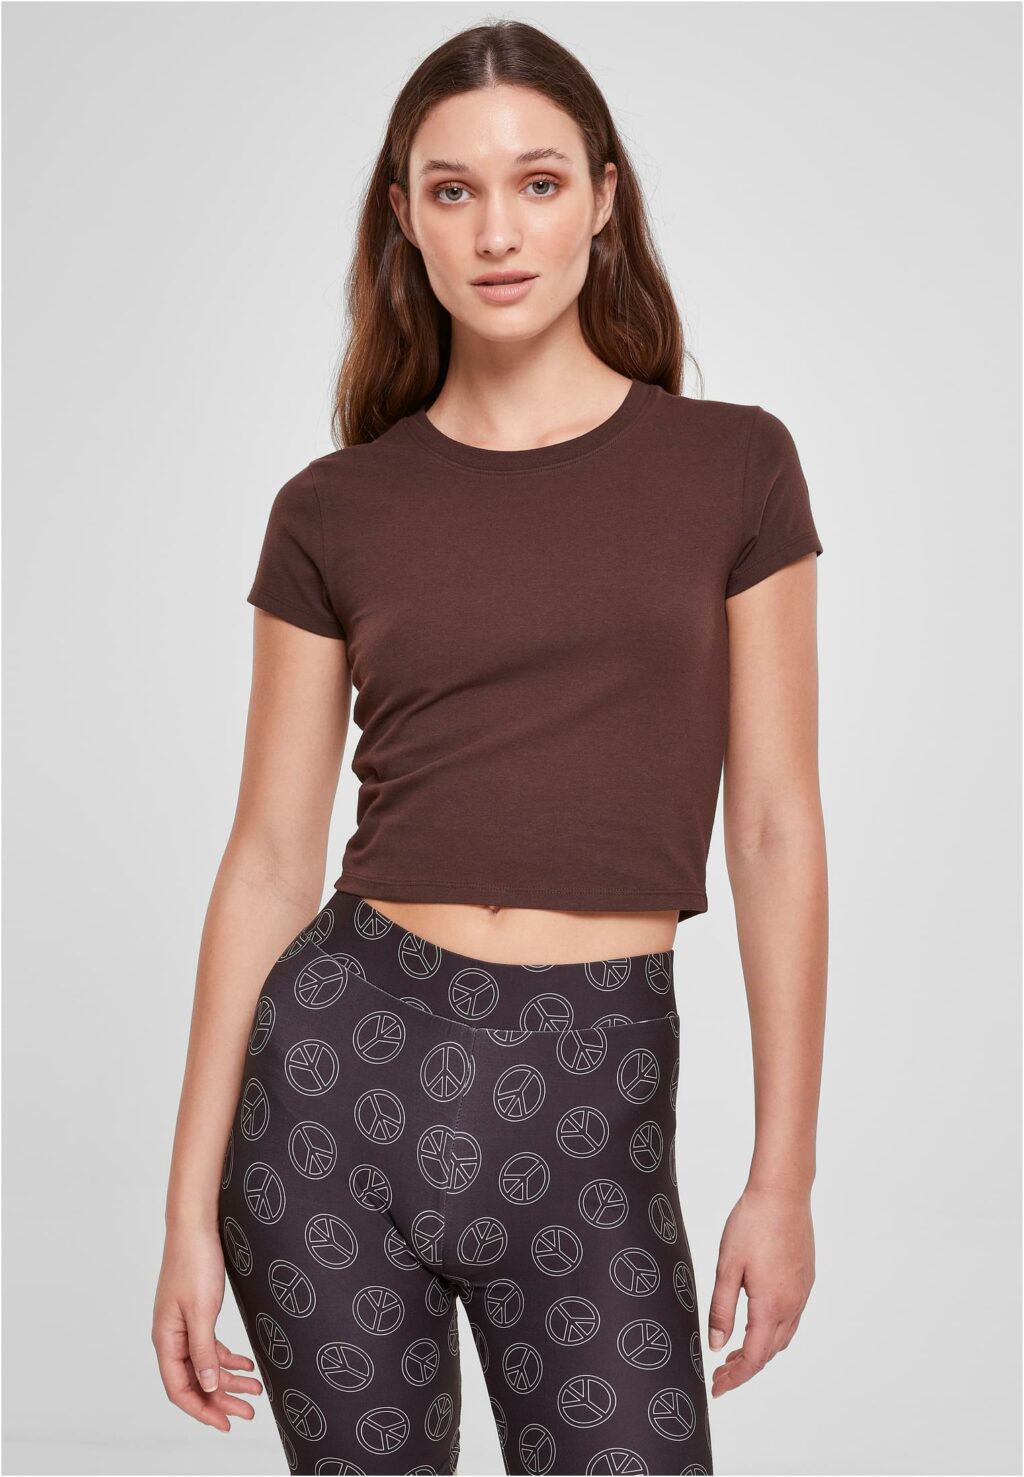 Urban Classics Ladies Stretch Jersey Cropped Tee brown TB2754